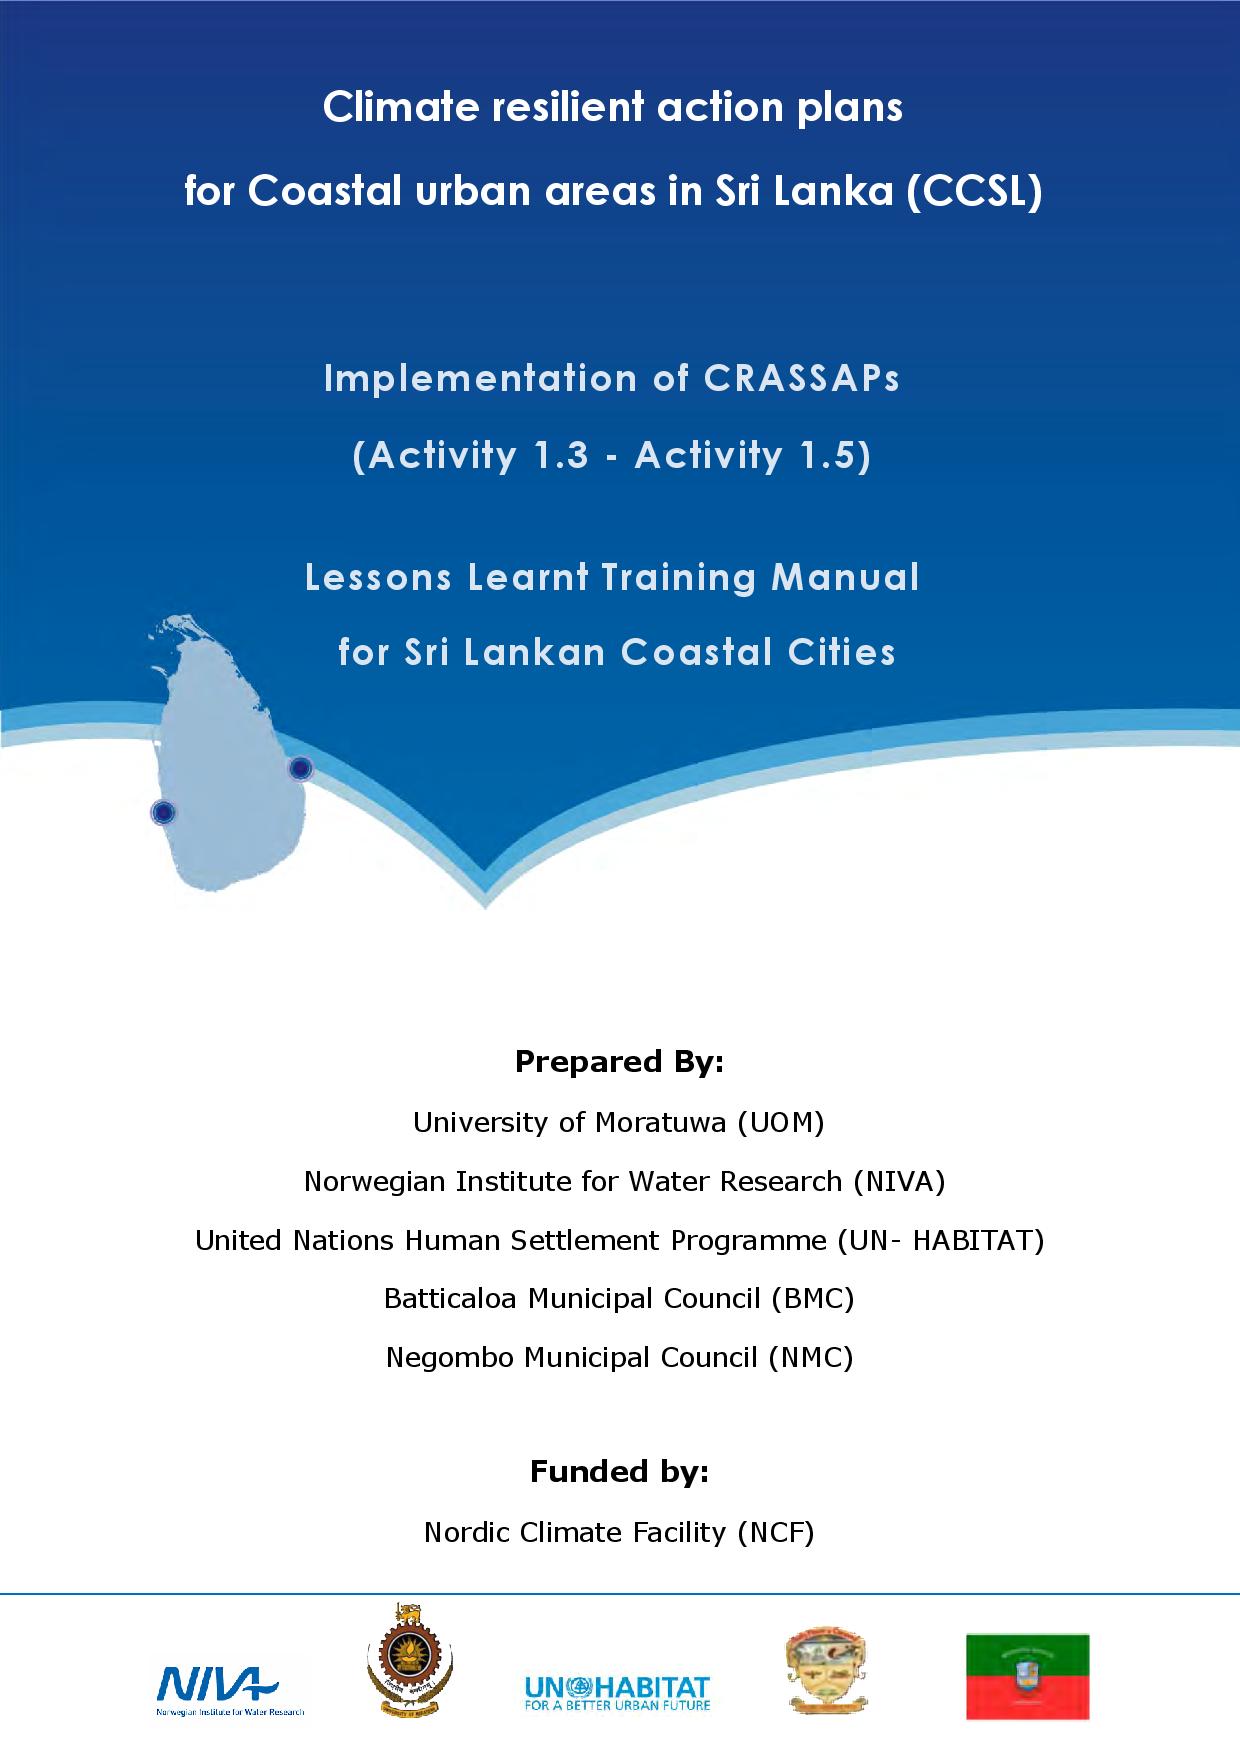 Climate Resilient Action Plans for Coastal Urban Areas in Sri Lanka CCSL (2012) – CCCI